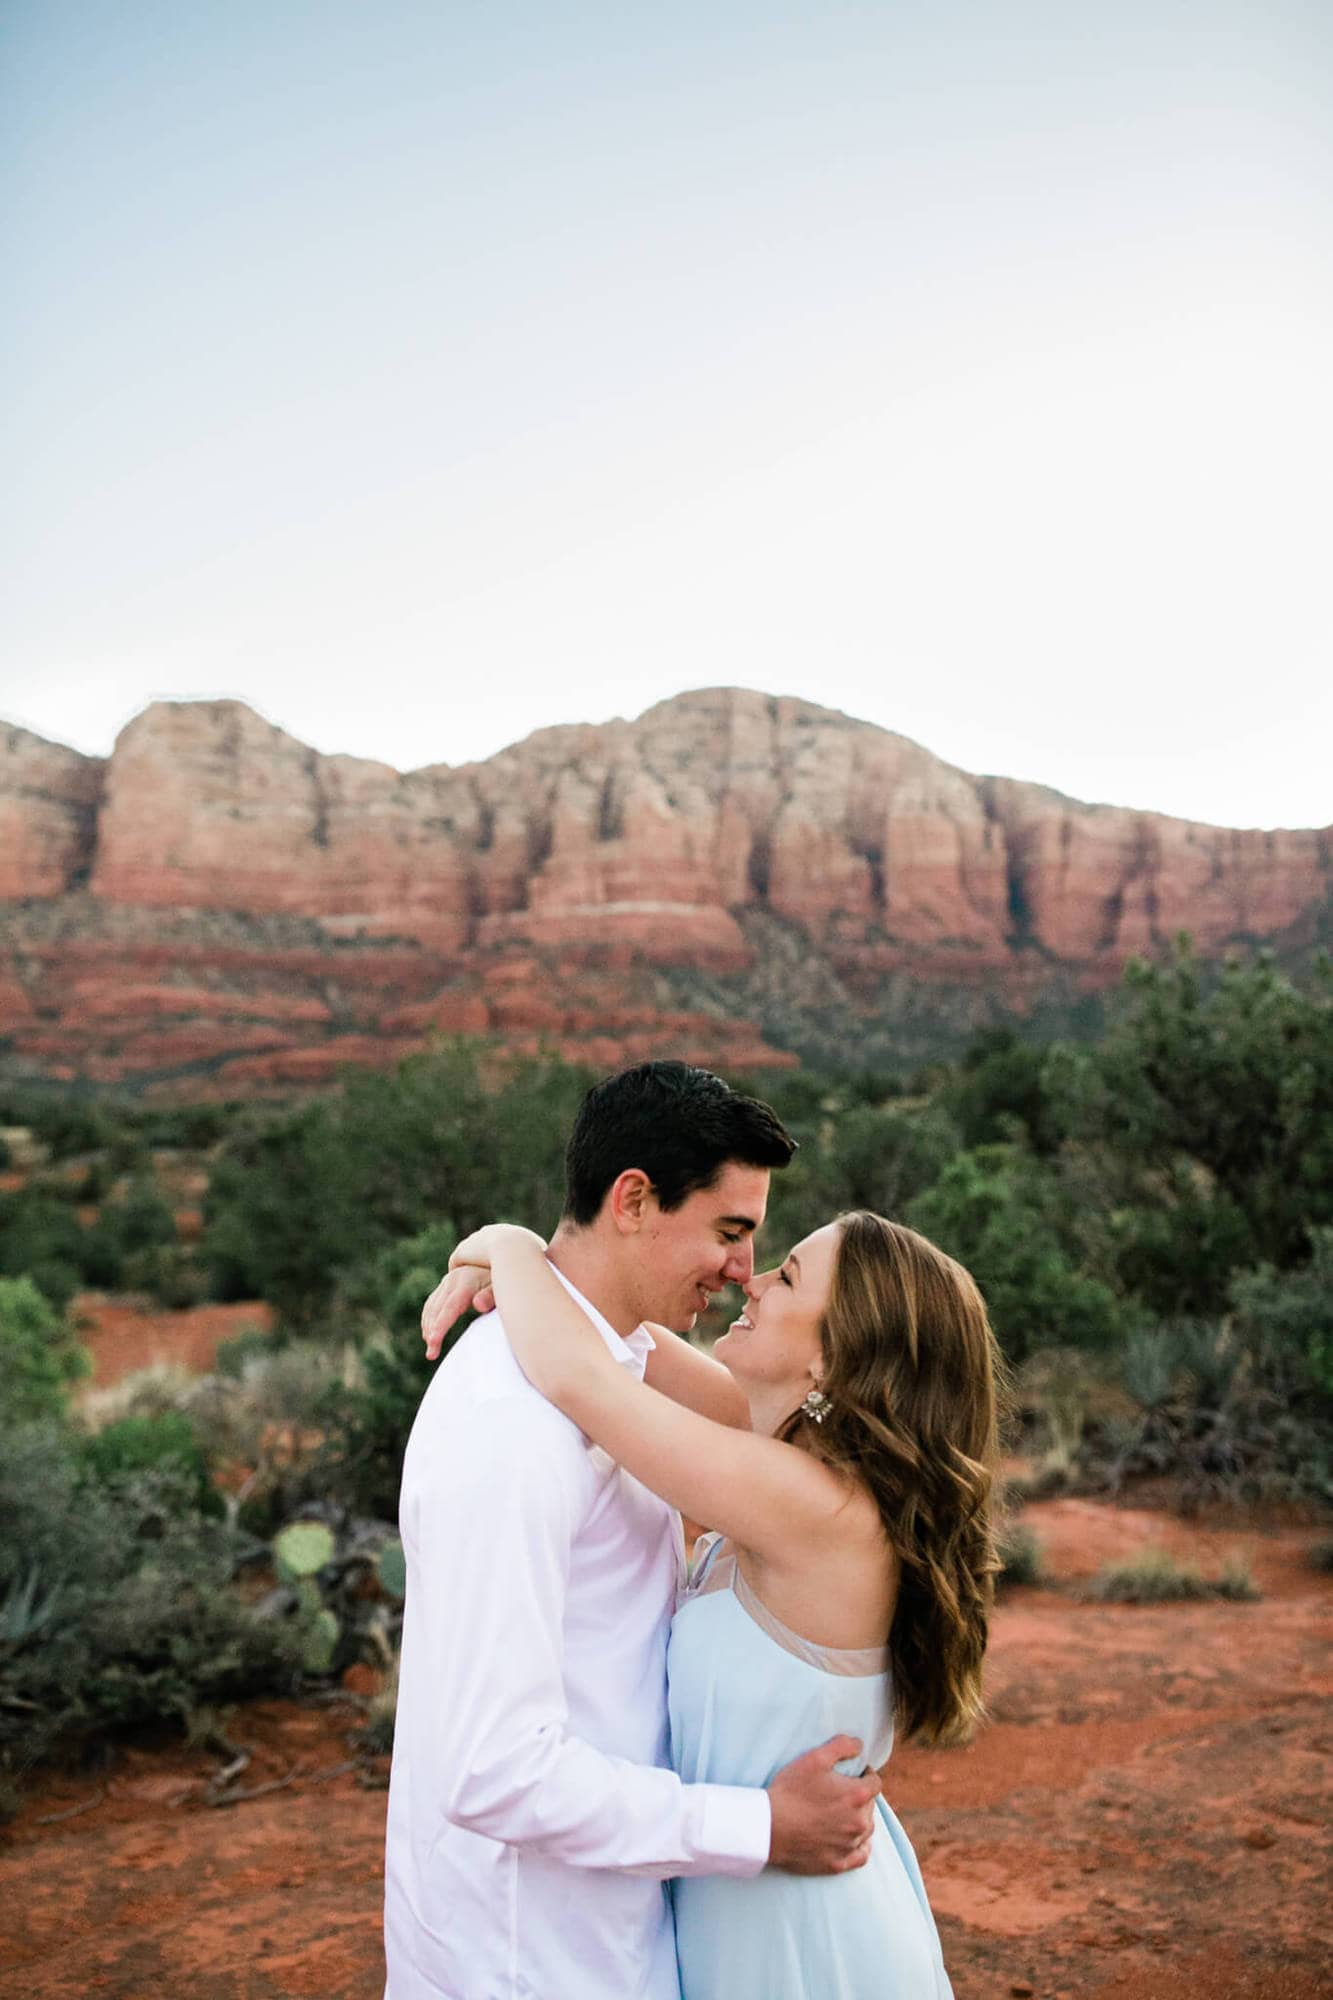 Cute bride and groom touch noses on their elopement day. The famous red rocks of Sedona frame the couple perfectly.